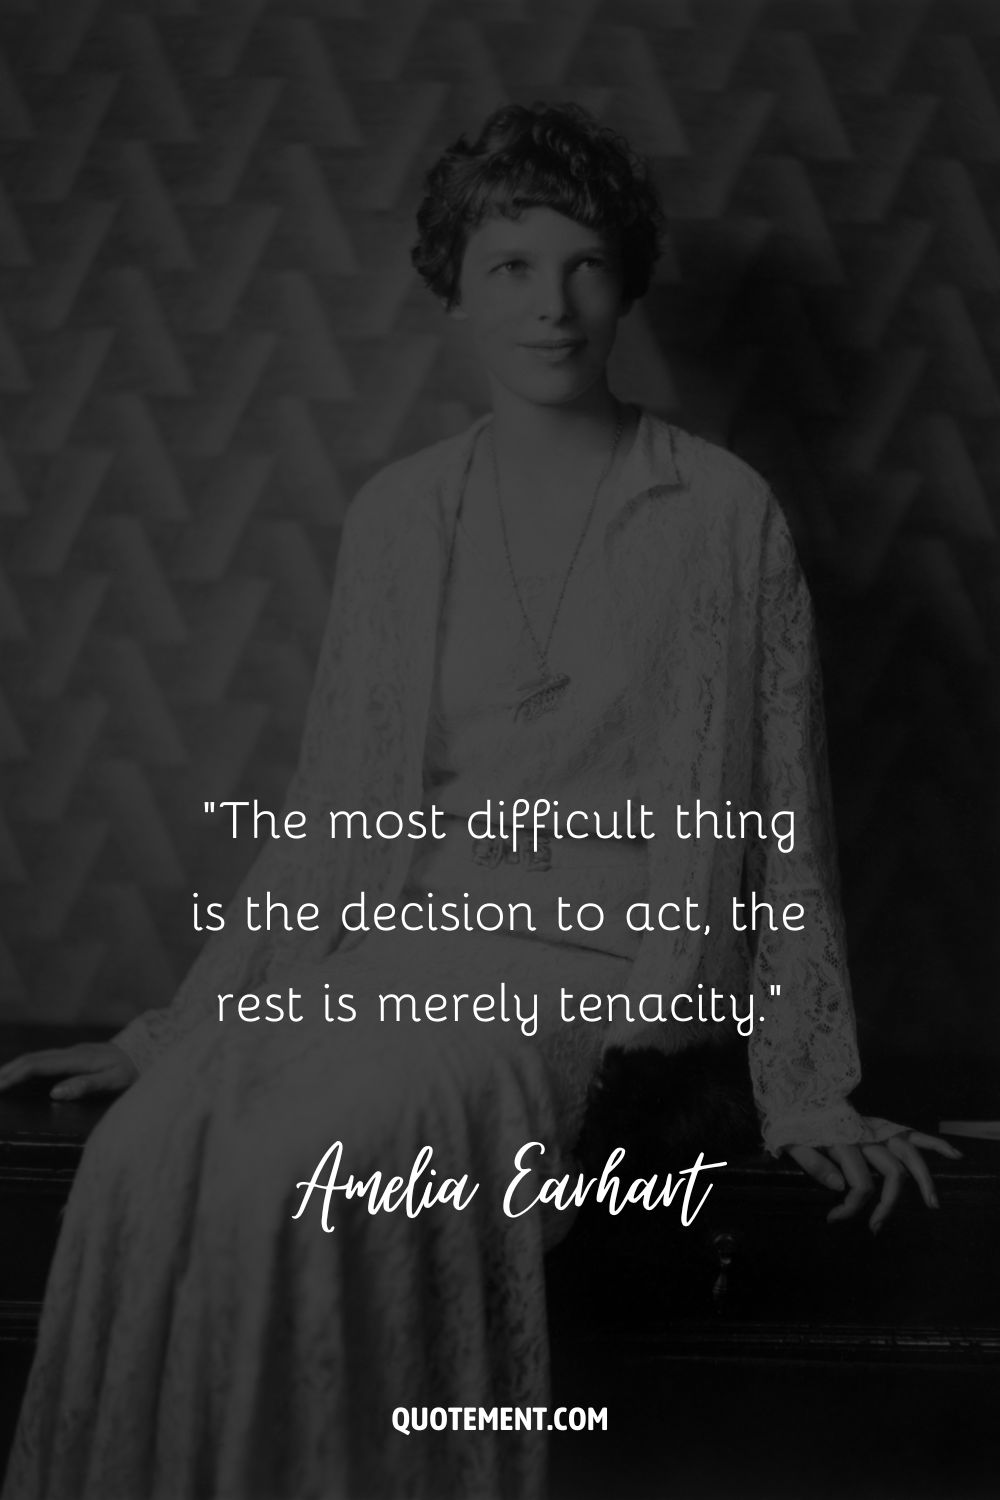 “The most difficult thing is the decision to act, the rest is merely tenacity.” ― Amelia Earhart